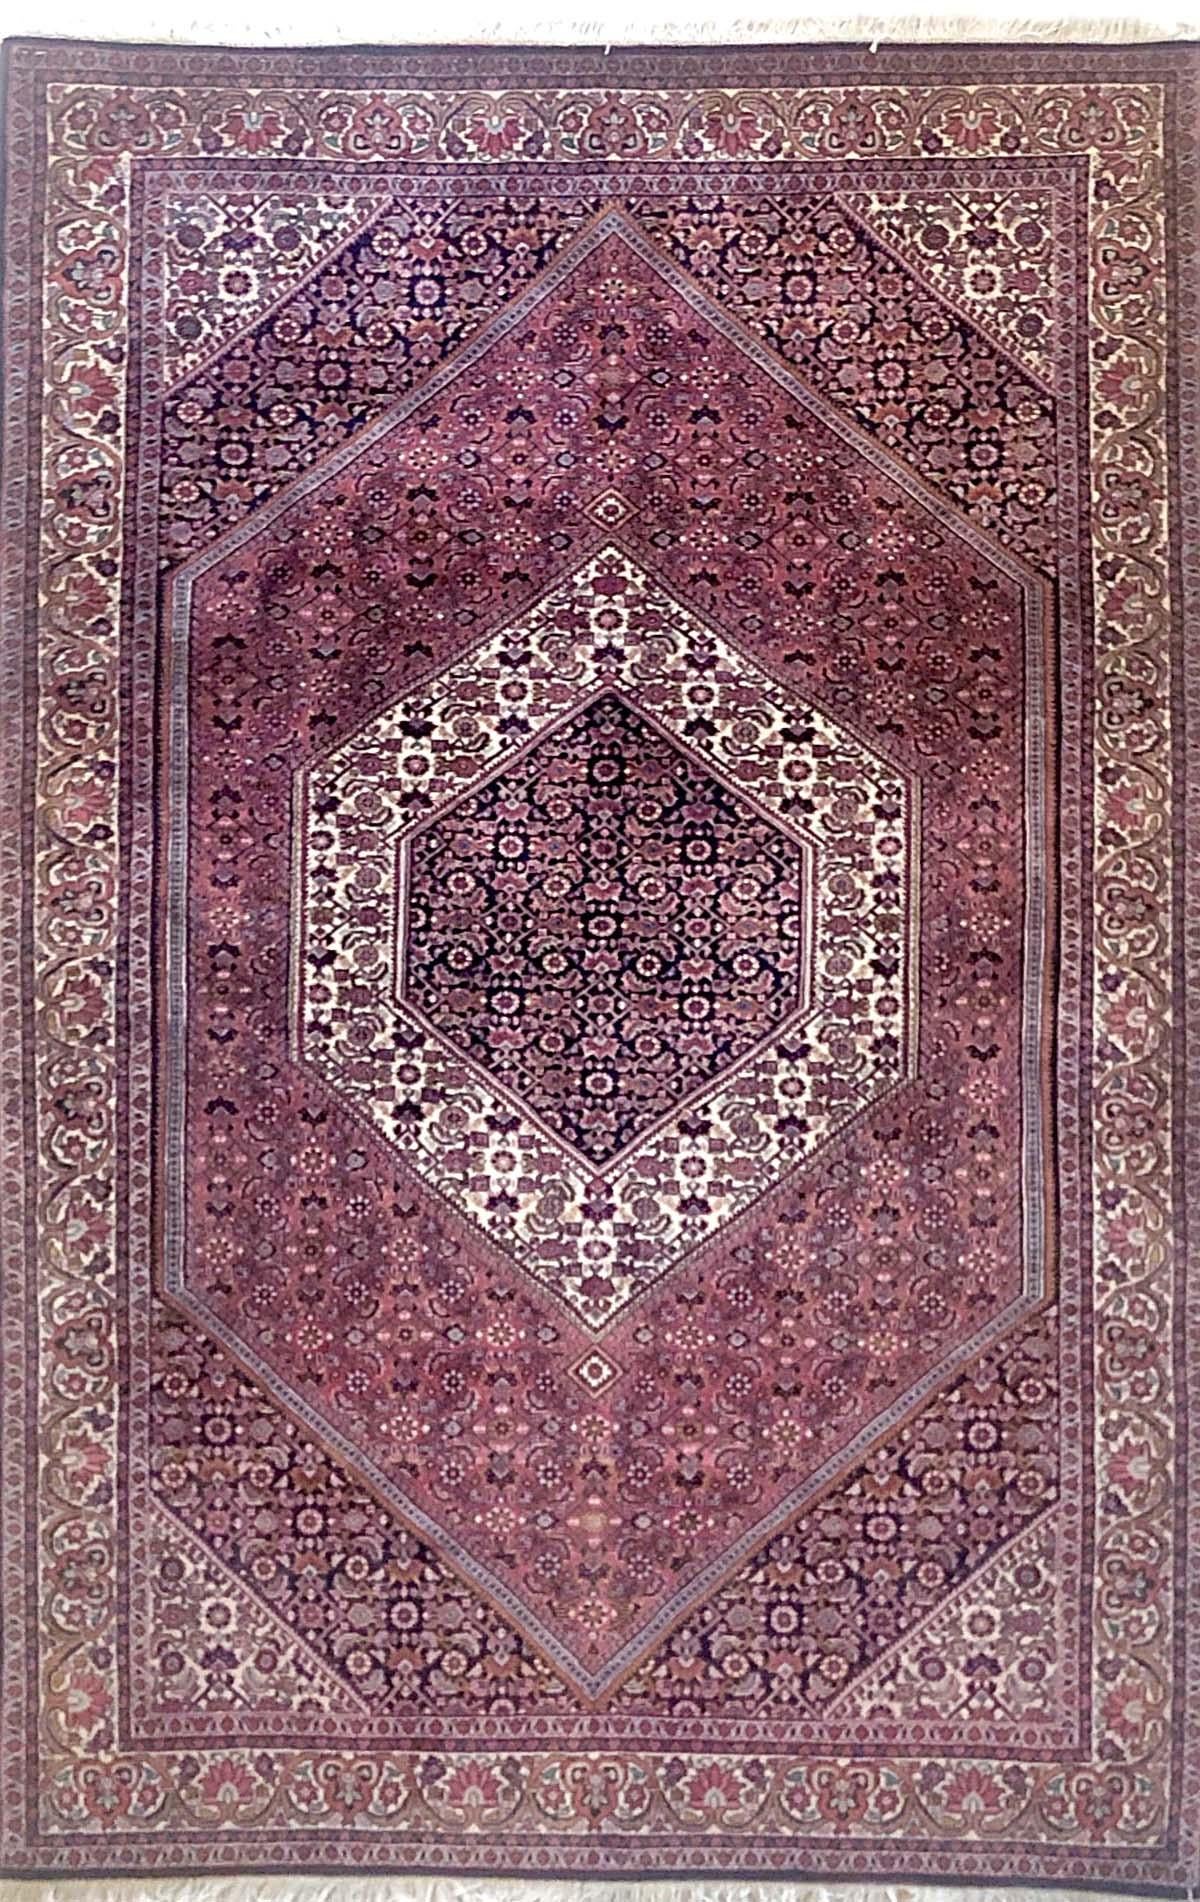 This piece is a handmade Persian Bijar rug. The pile is wool with cotton foundation. The base color is red, with indigo blue border. This rug has highly detailed design with diamond medallion. Bijar rugs are well-known for their craftsmanship and